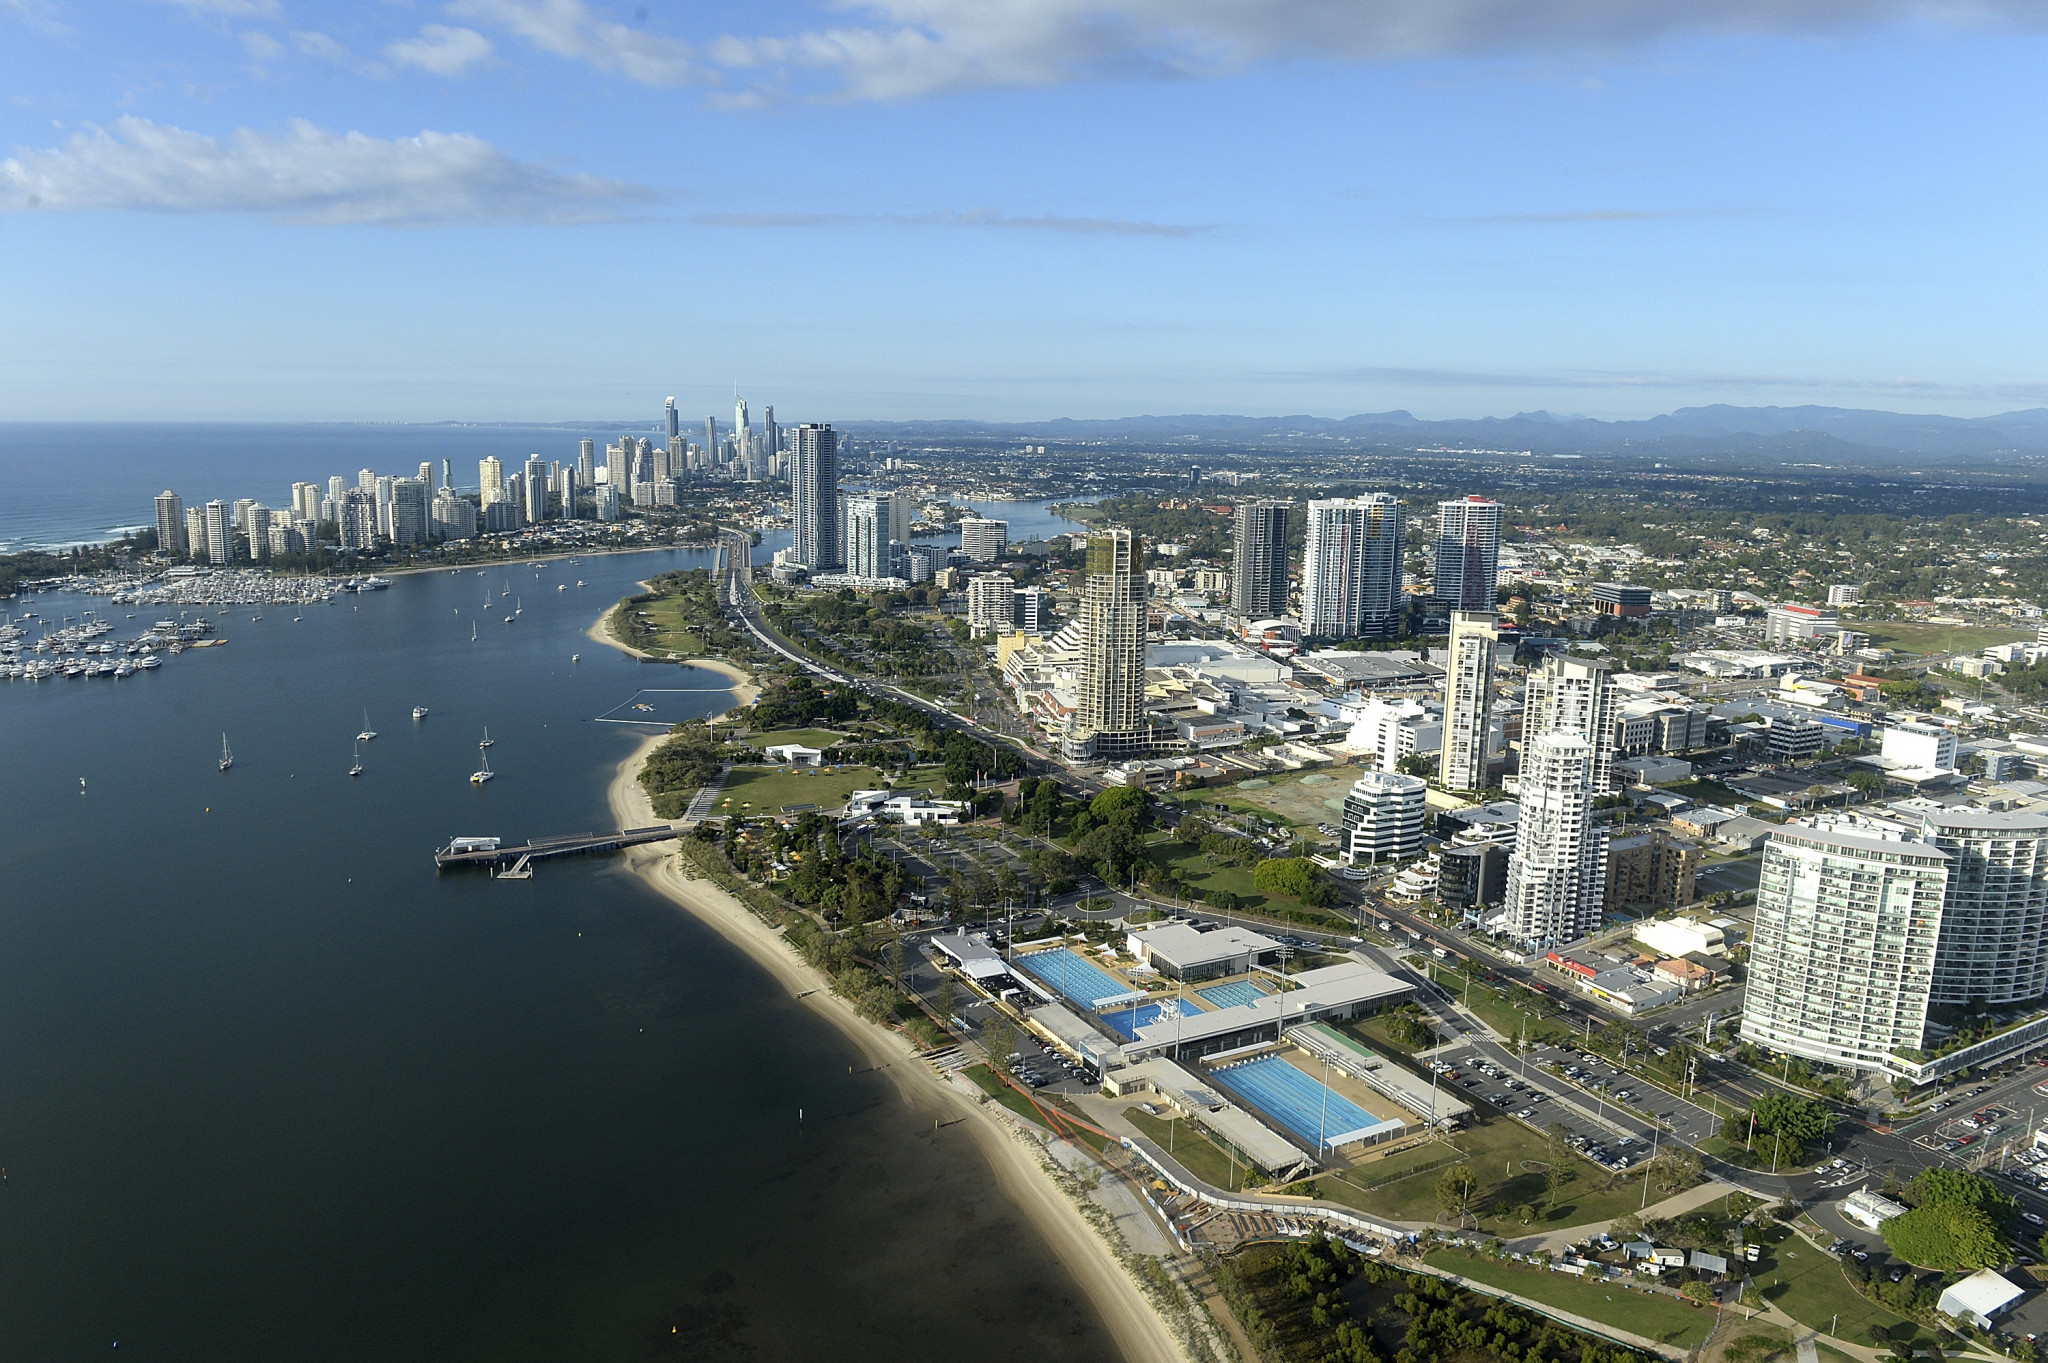 The 2018 Commonwealth Games will take place in Gold Coast, Australia ©Getty Images